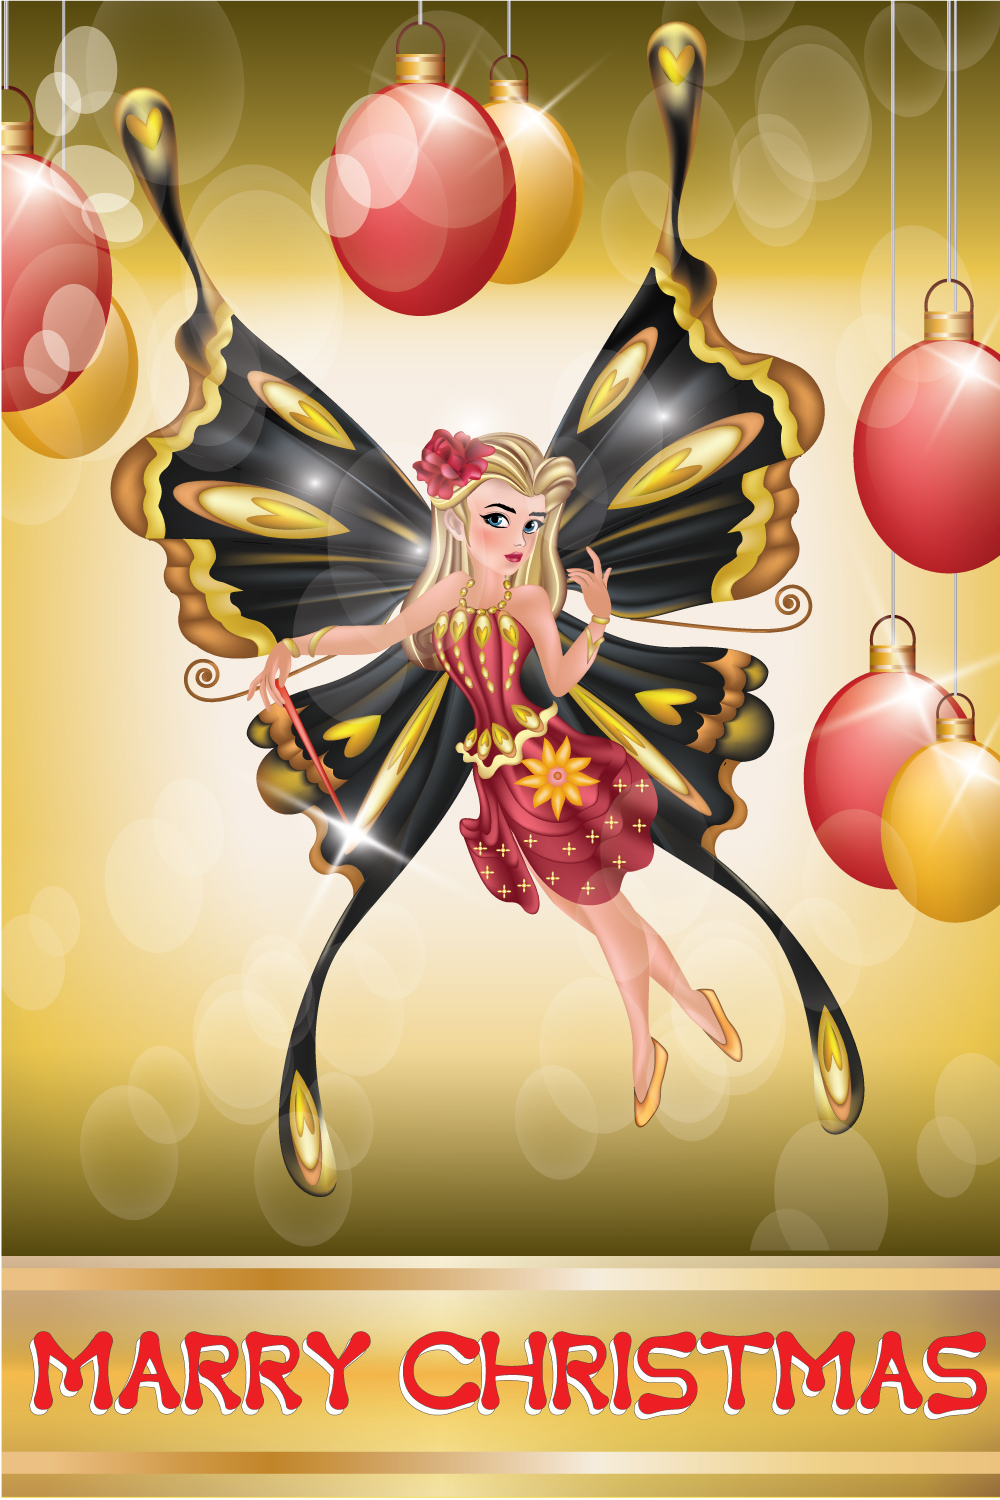 Portrait-of-a-butterfly-barbie-wearing-a-fairy-costume-and-holding-a-magic-wand-for-christmass pinterest preview image.